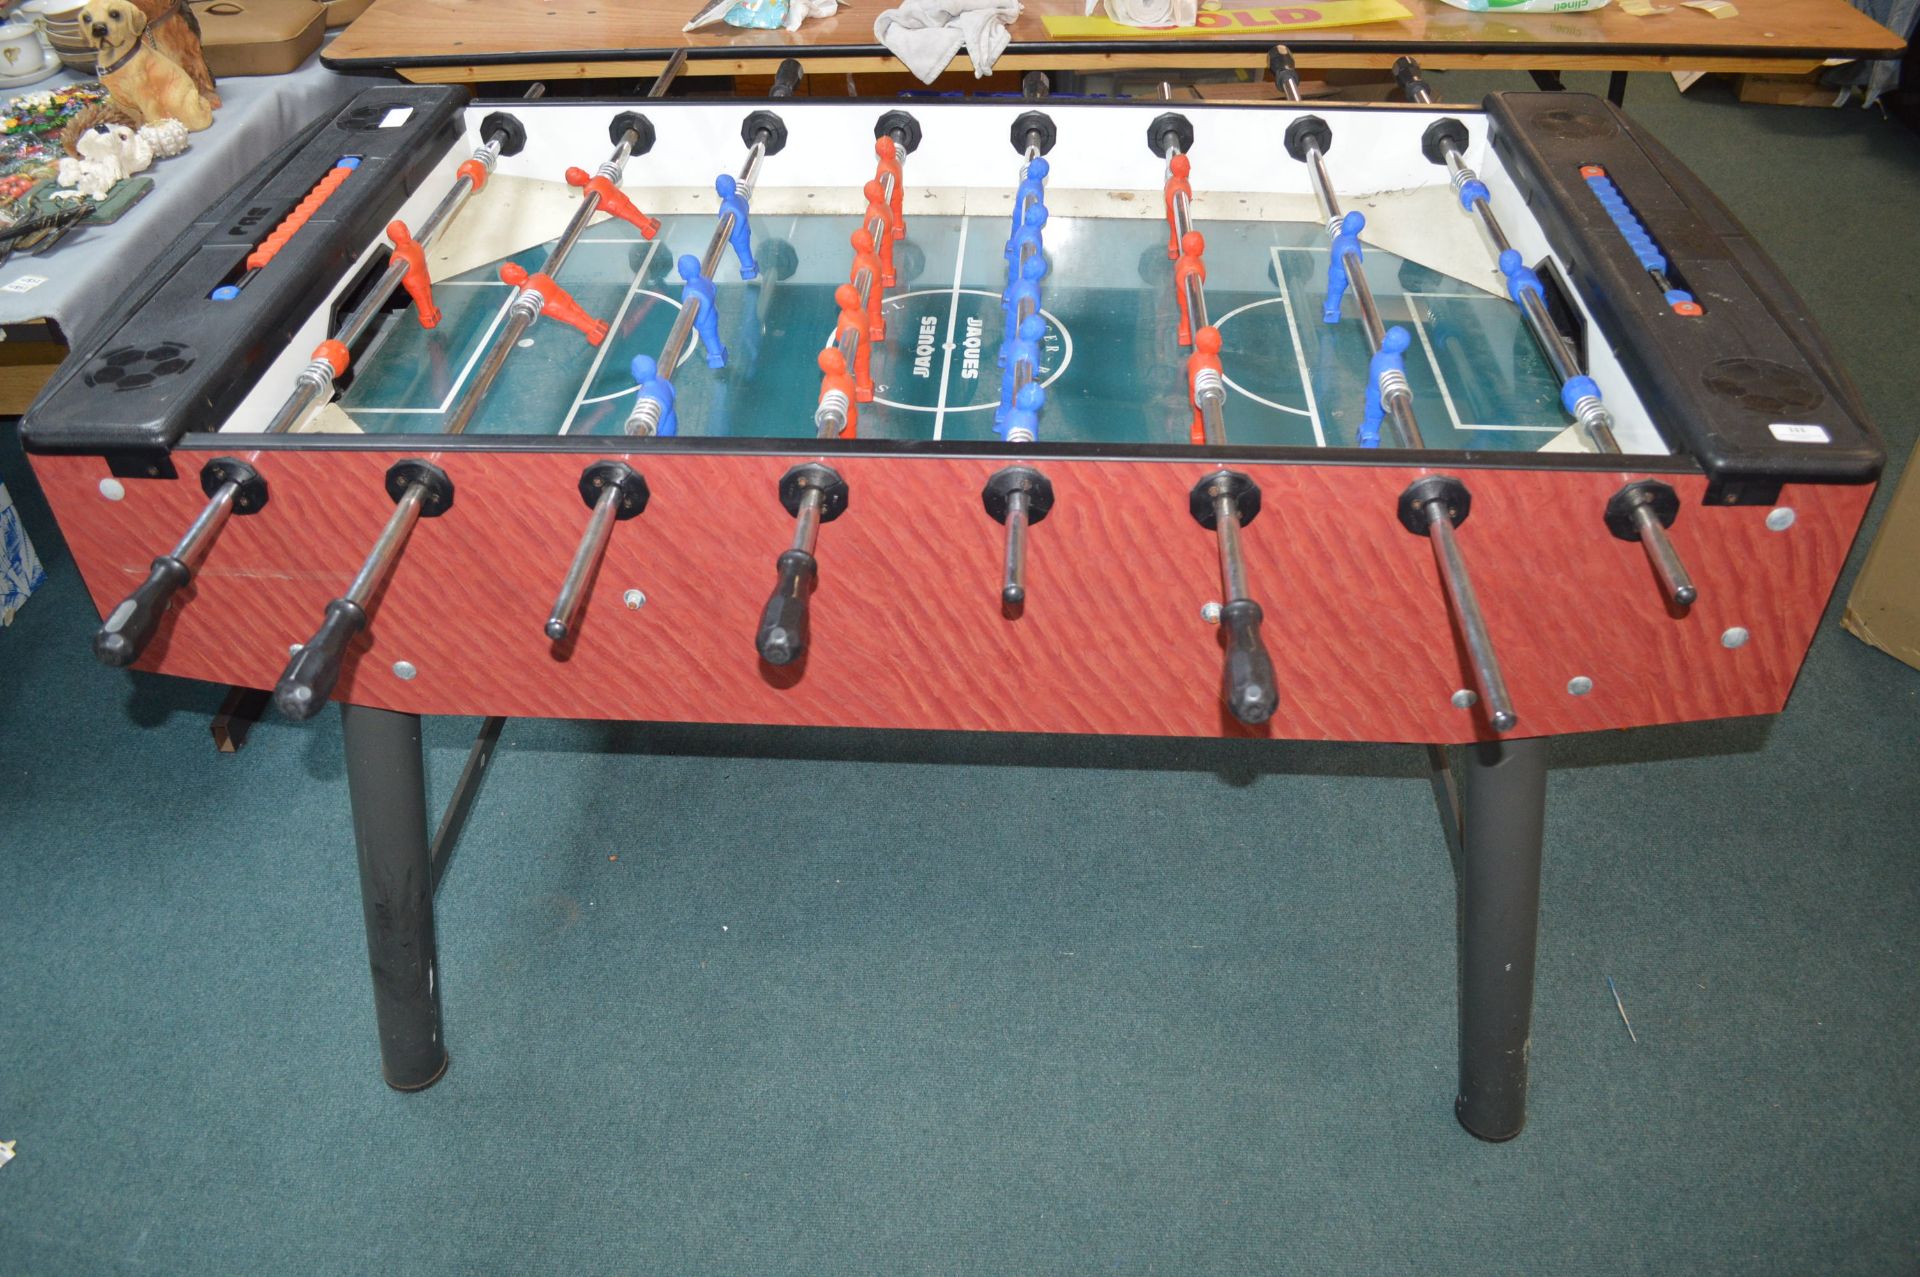 Jaques Table Football Game - Image 2 of 3